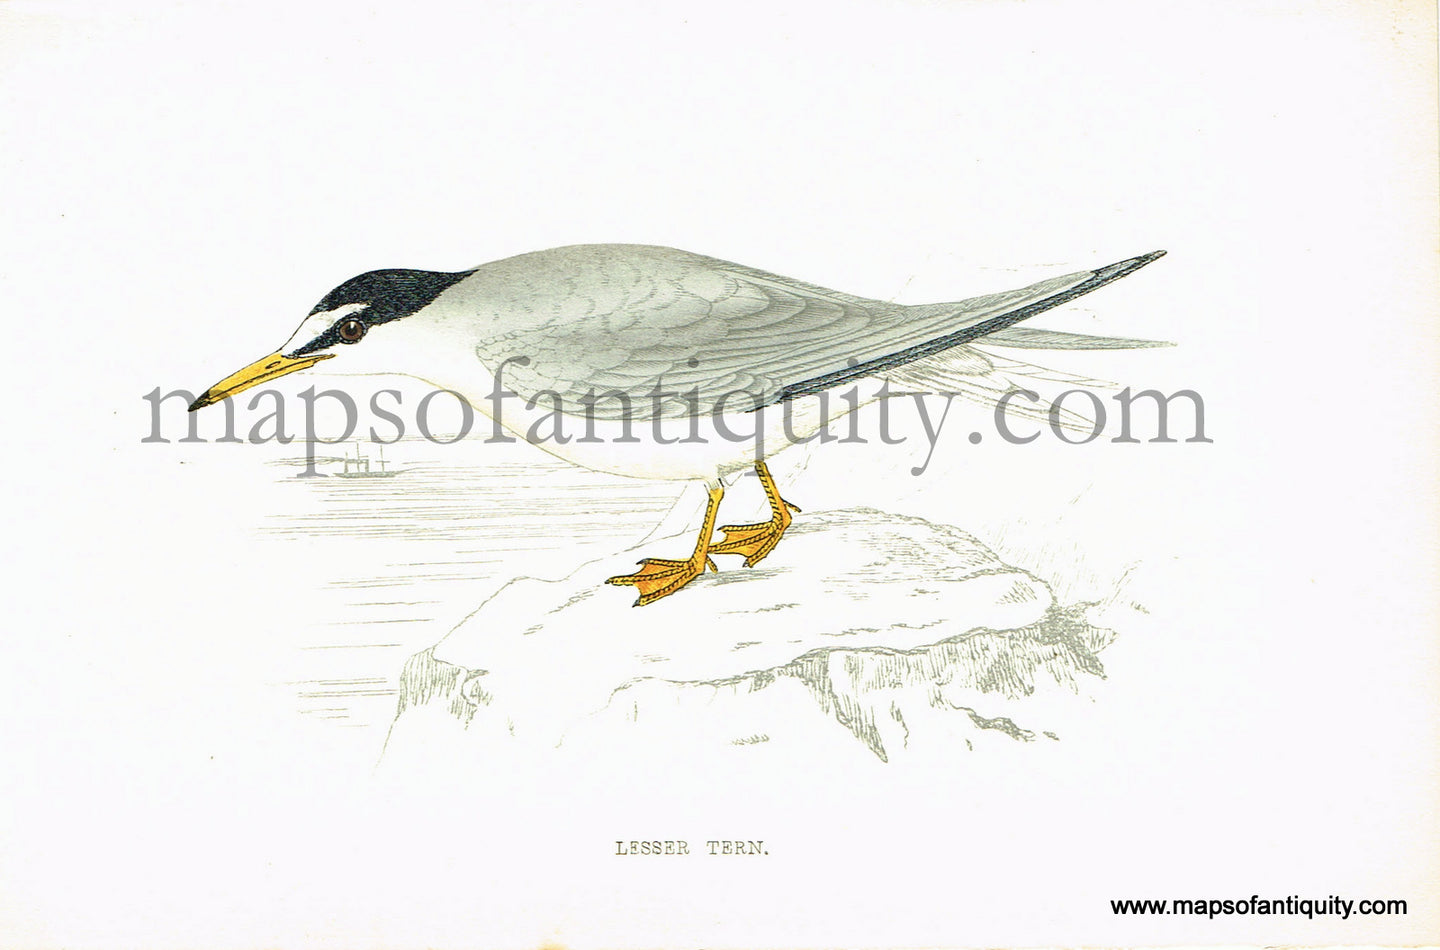 Antique-Hand-Colored-Engraved-Illustration-Lesser-Tern-Antique-Prints-Natural-History-Birds-1867-Morris-Maps-Of-Antiquity